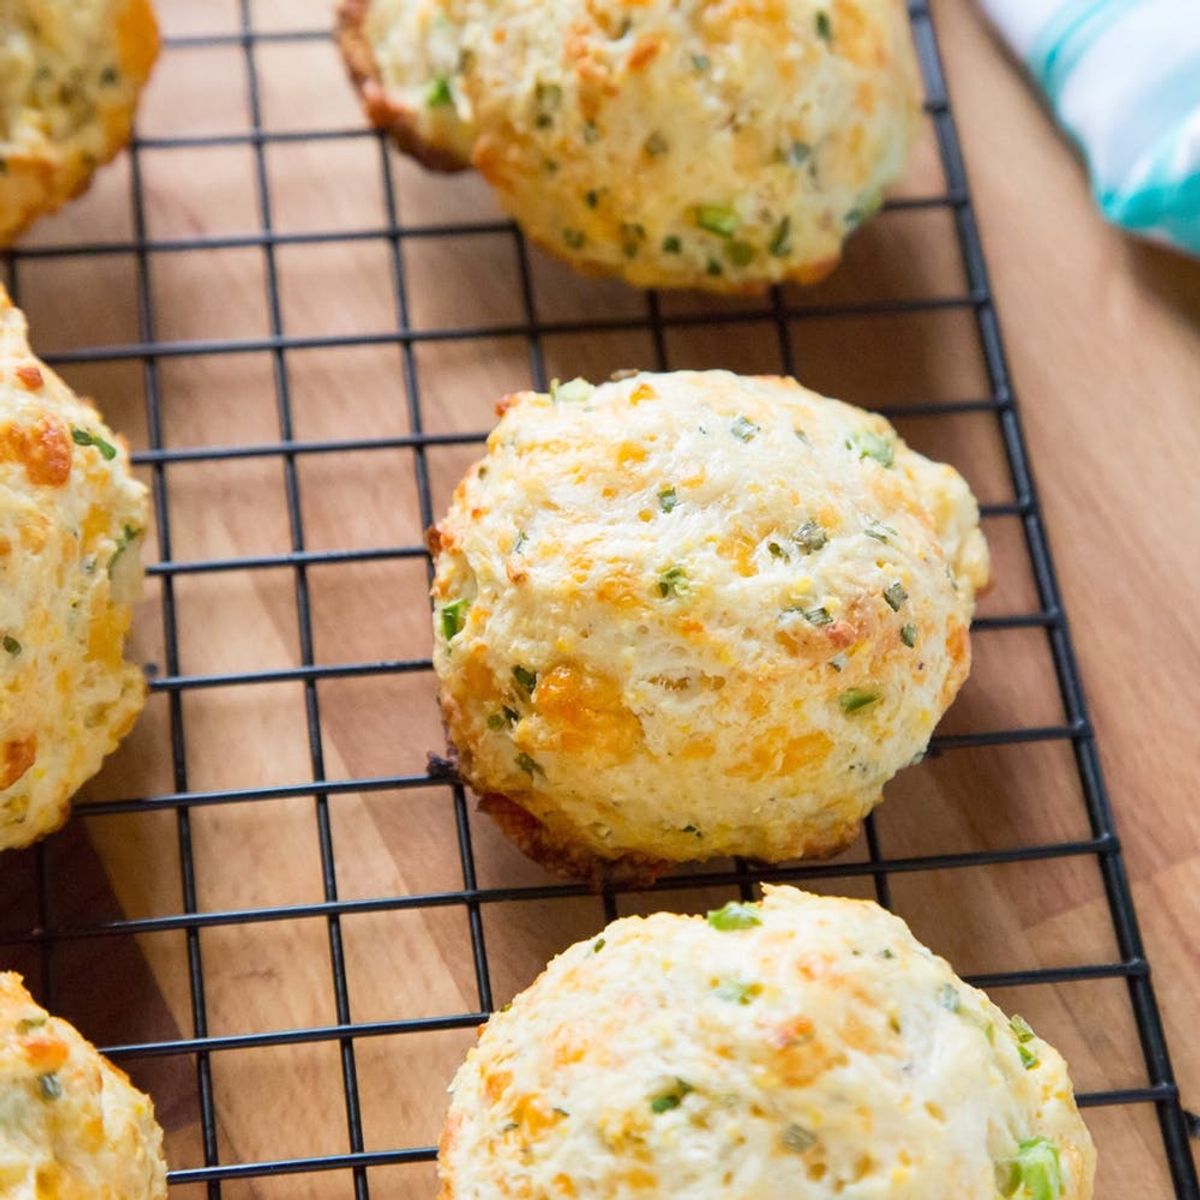 Make This Crazy Addictive Cornmeal Biscuits Recipe With Cheddar, Chives and Jalapeños